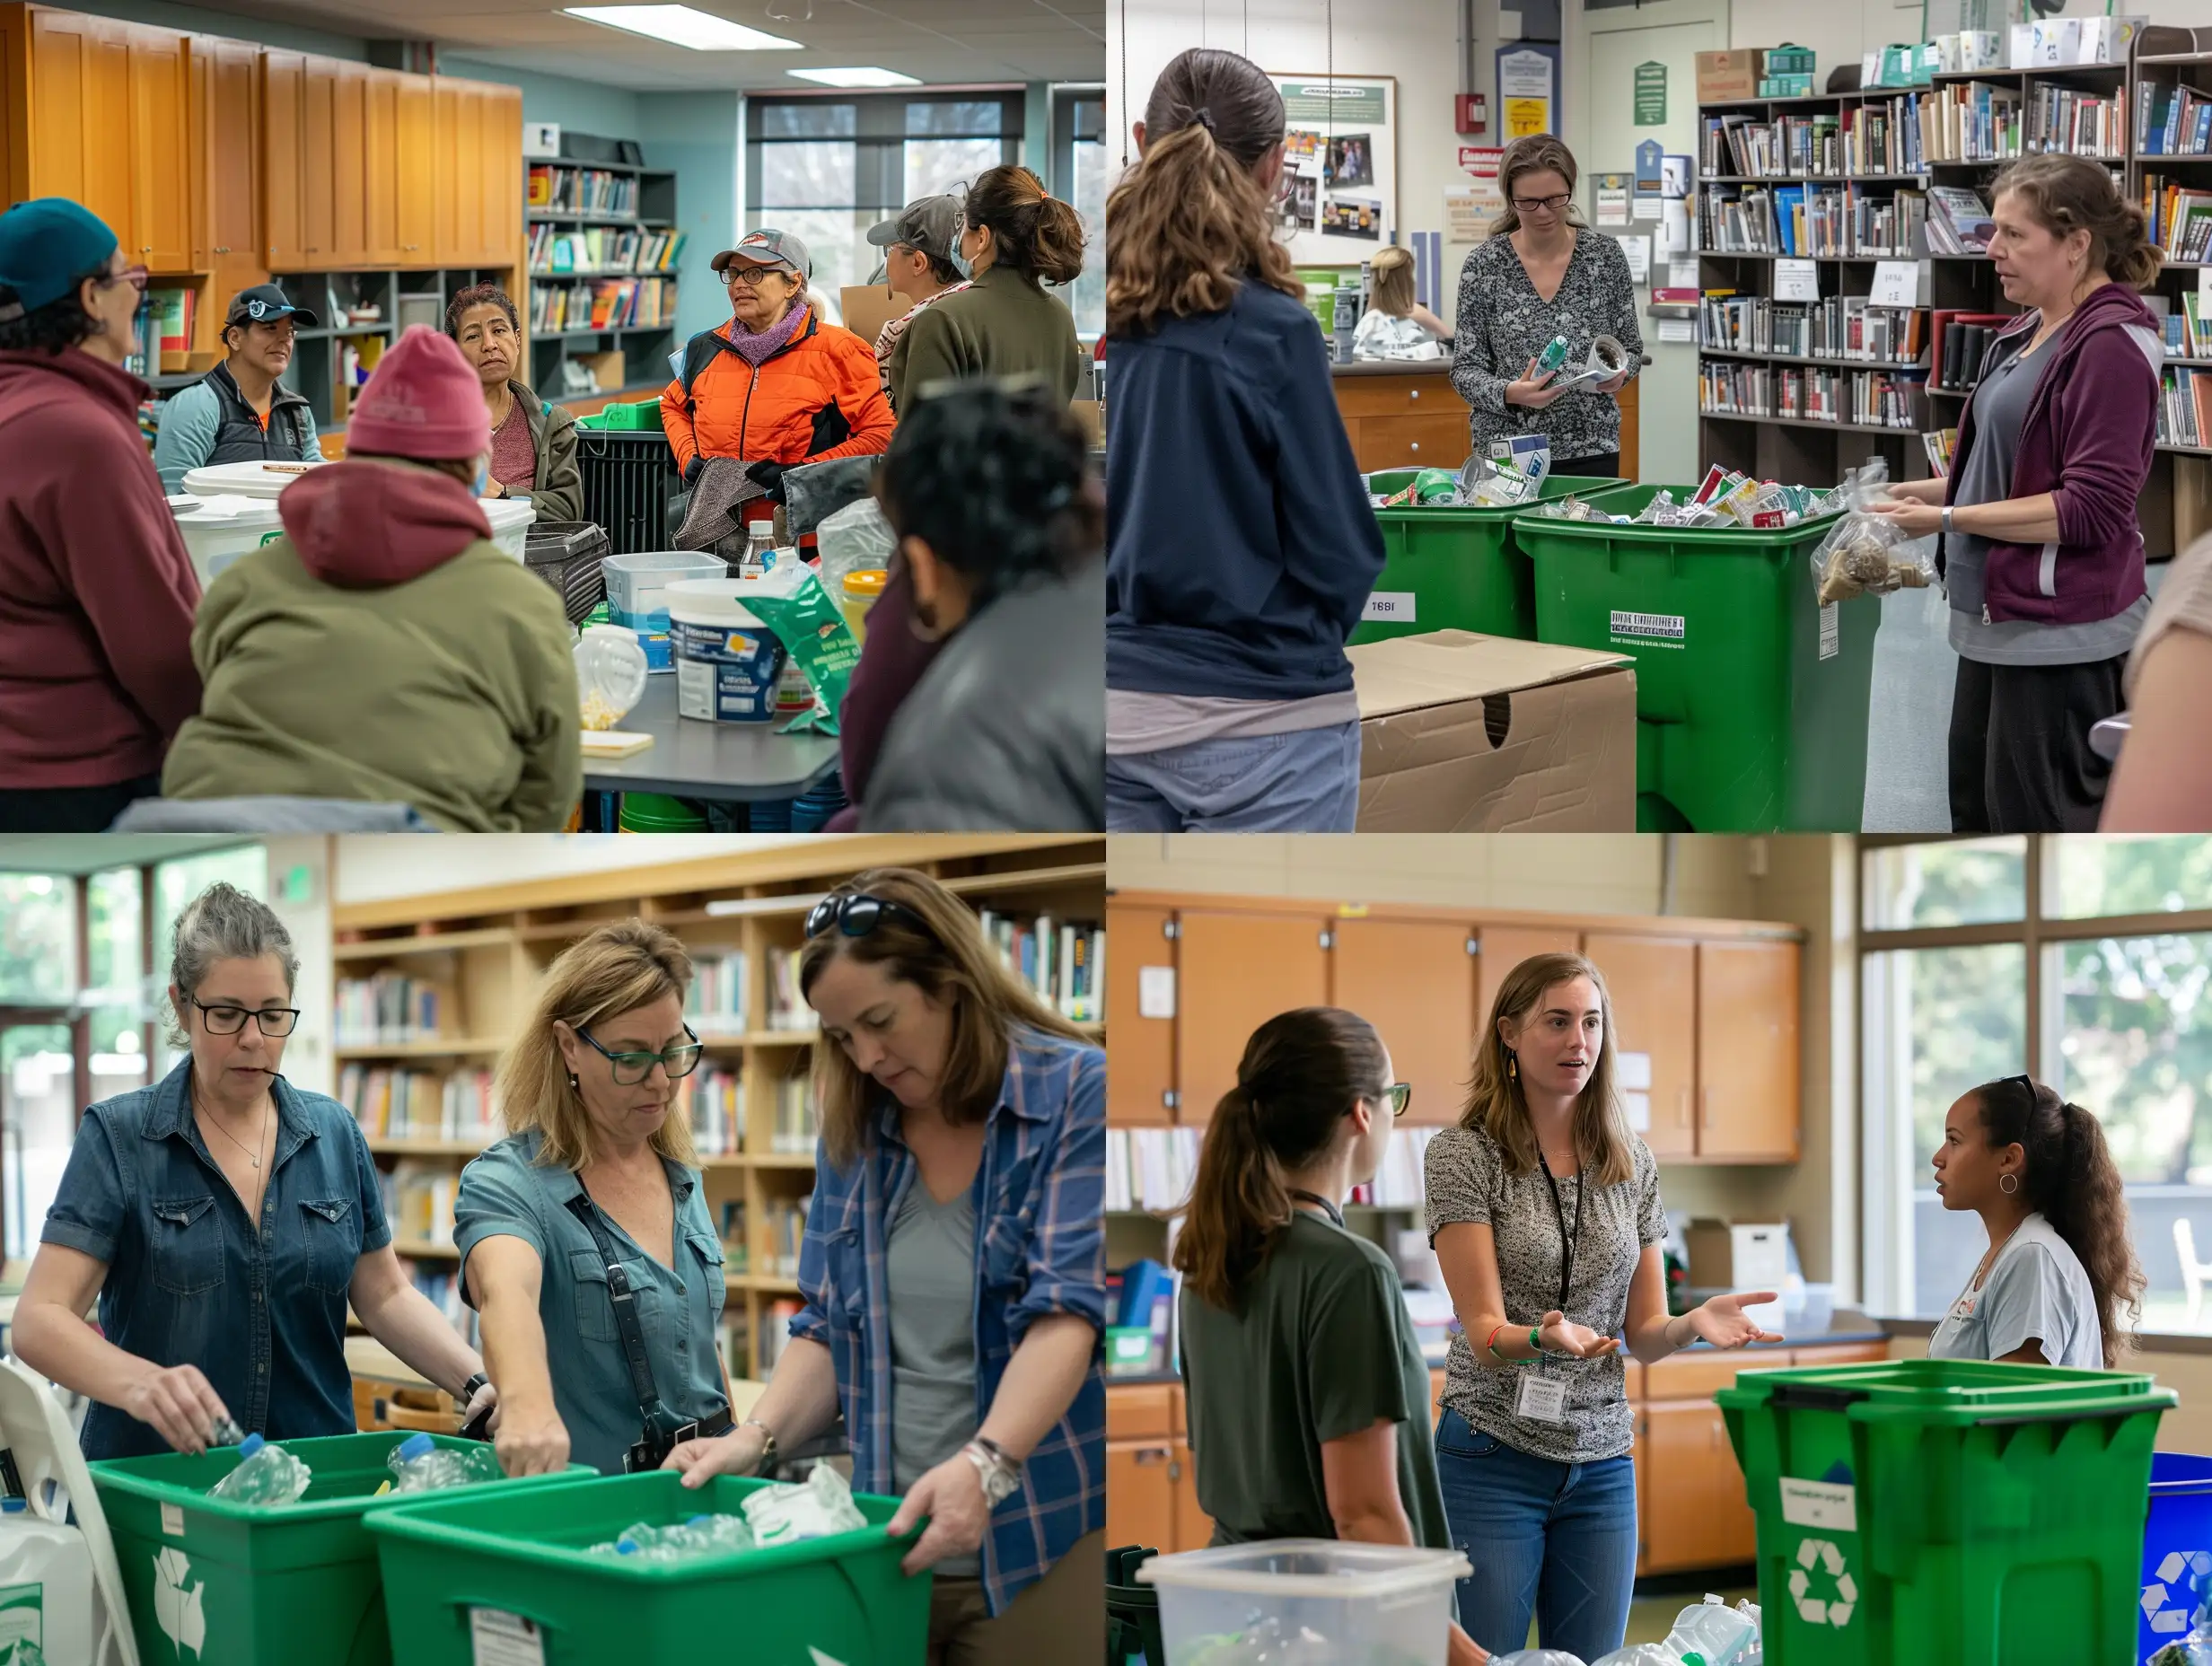 Citizens-Participating-in-Recycling-Workshop-at-Public-Library